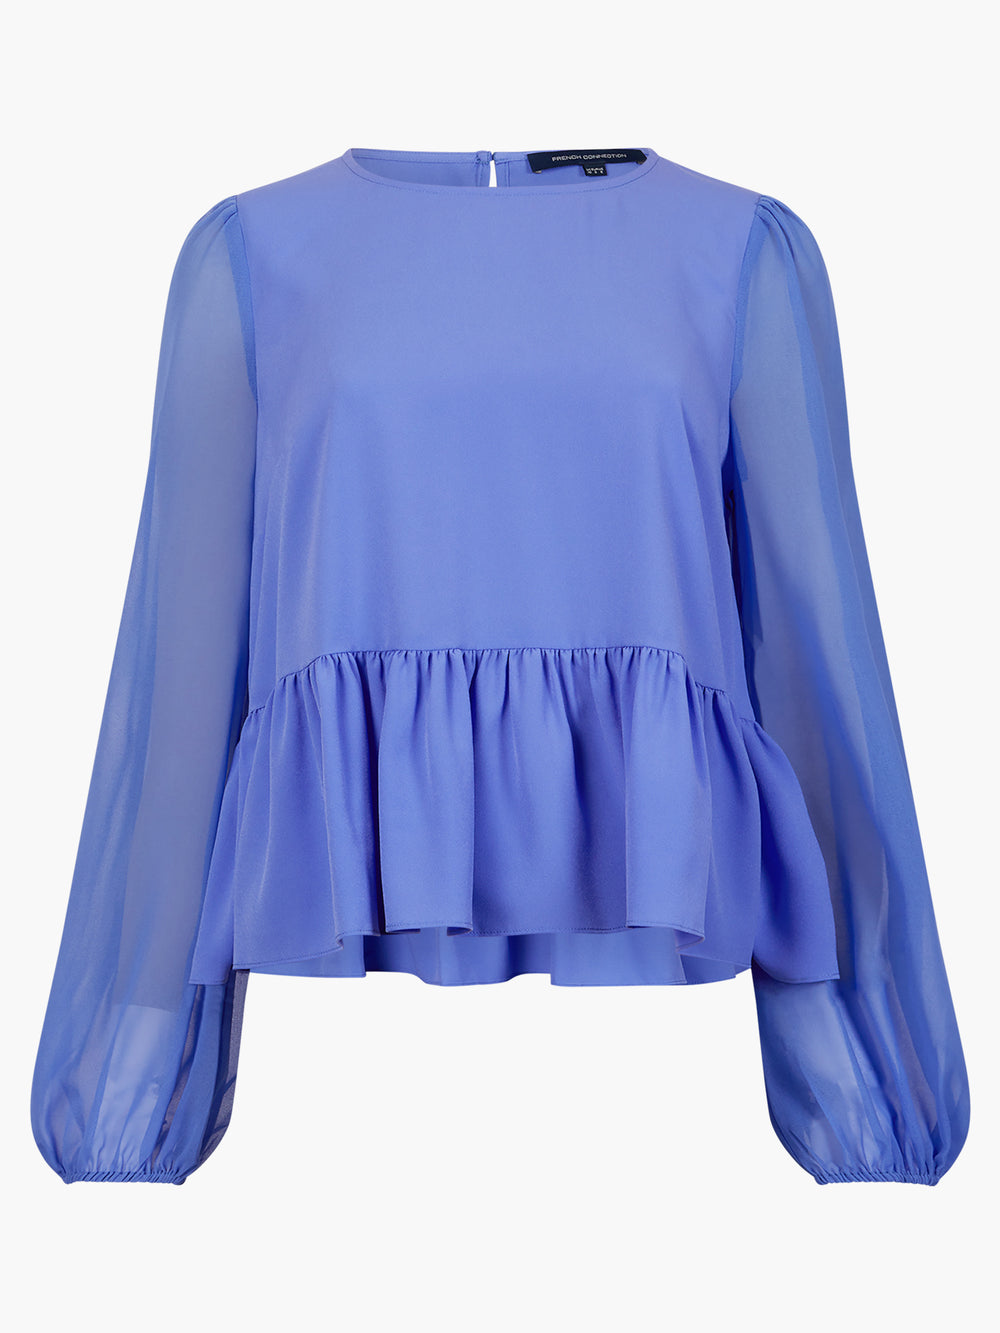 Crepe Light Georgette Peplum Top Baja Blue | French Connection UK